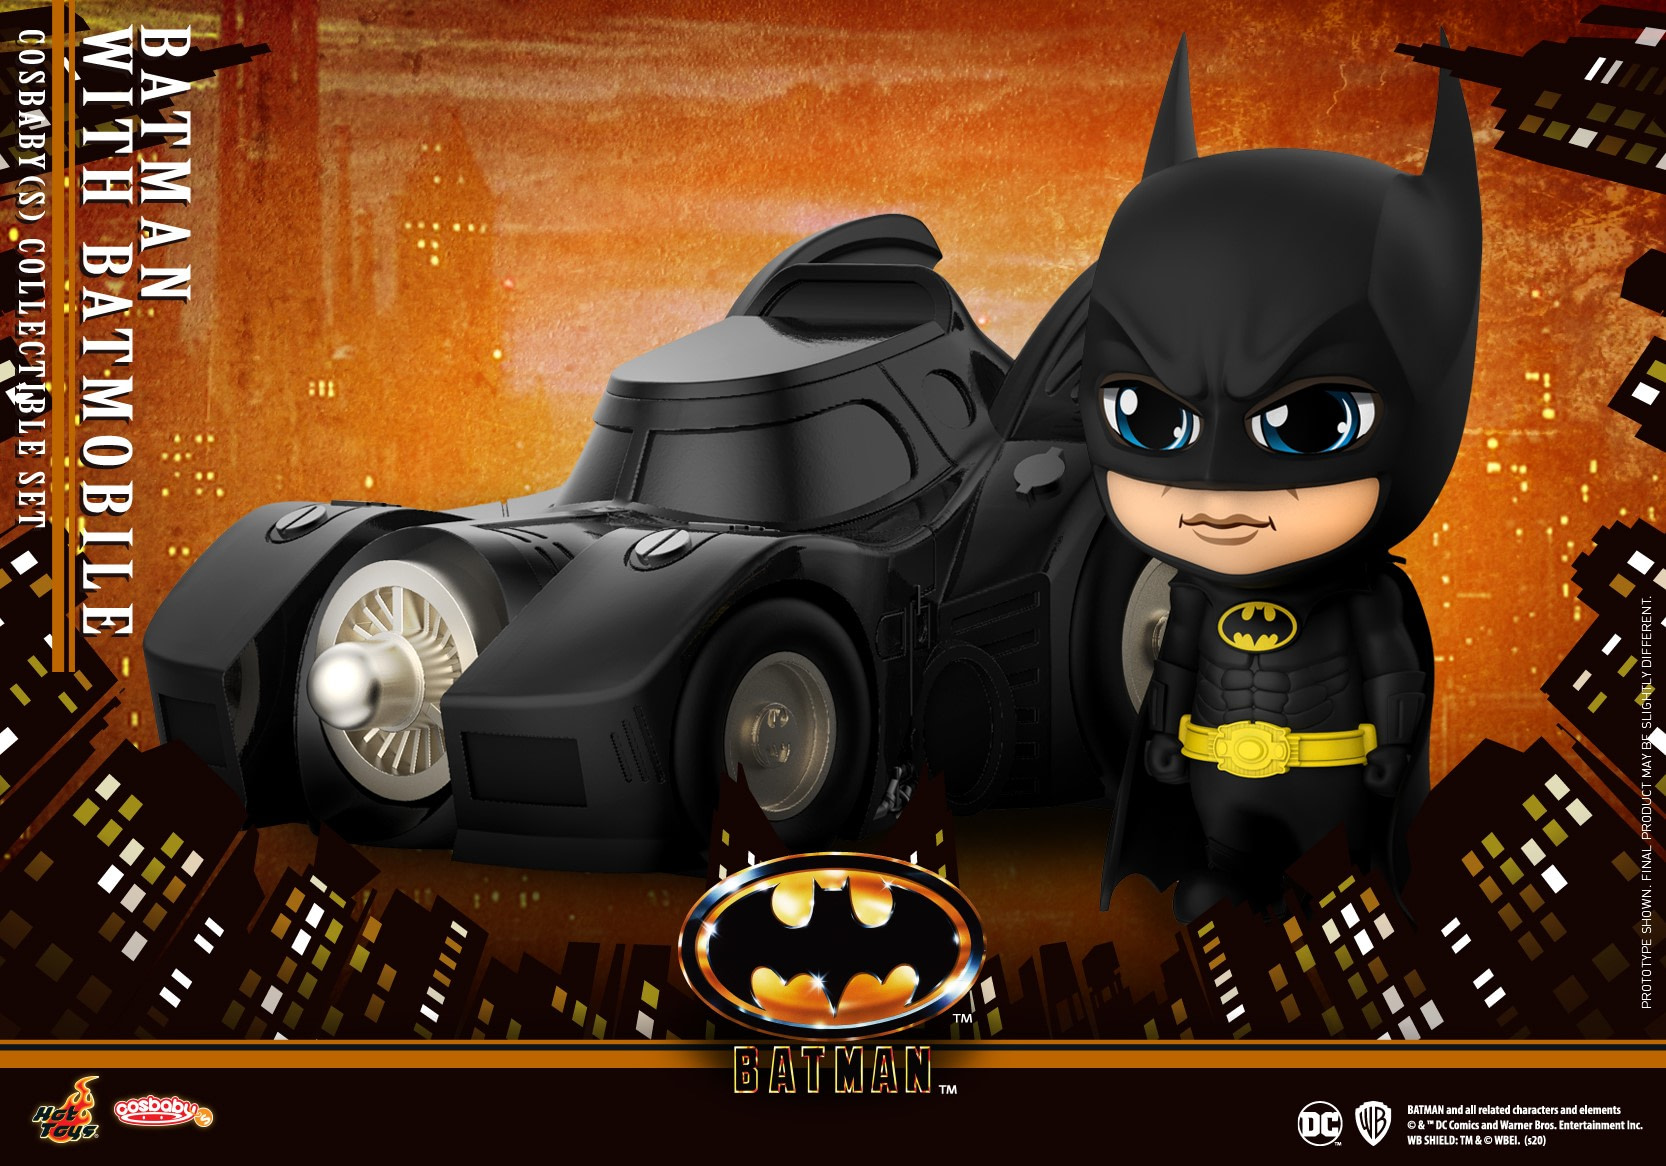 “Batman Returns” Receives Cosbaby Collectibles from Hot Toys